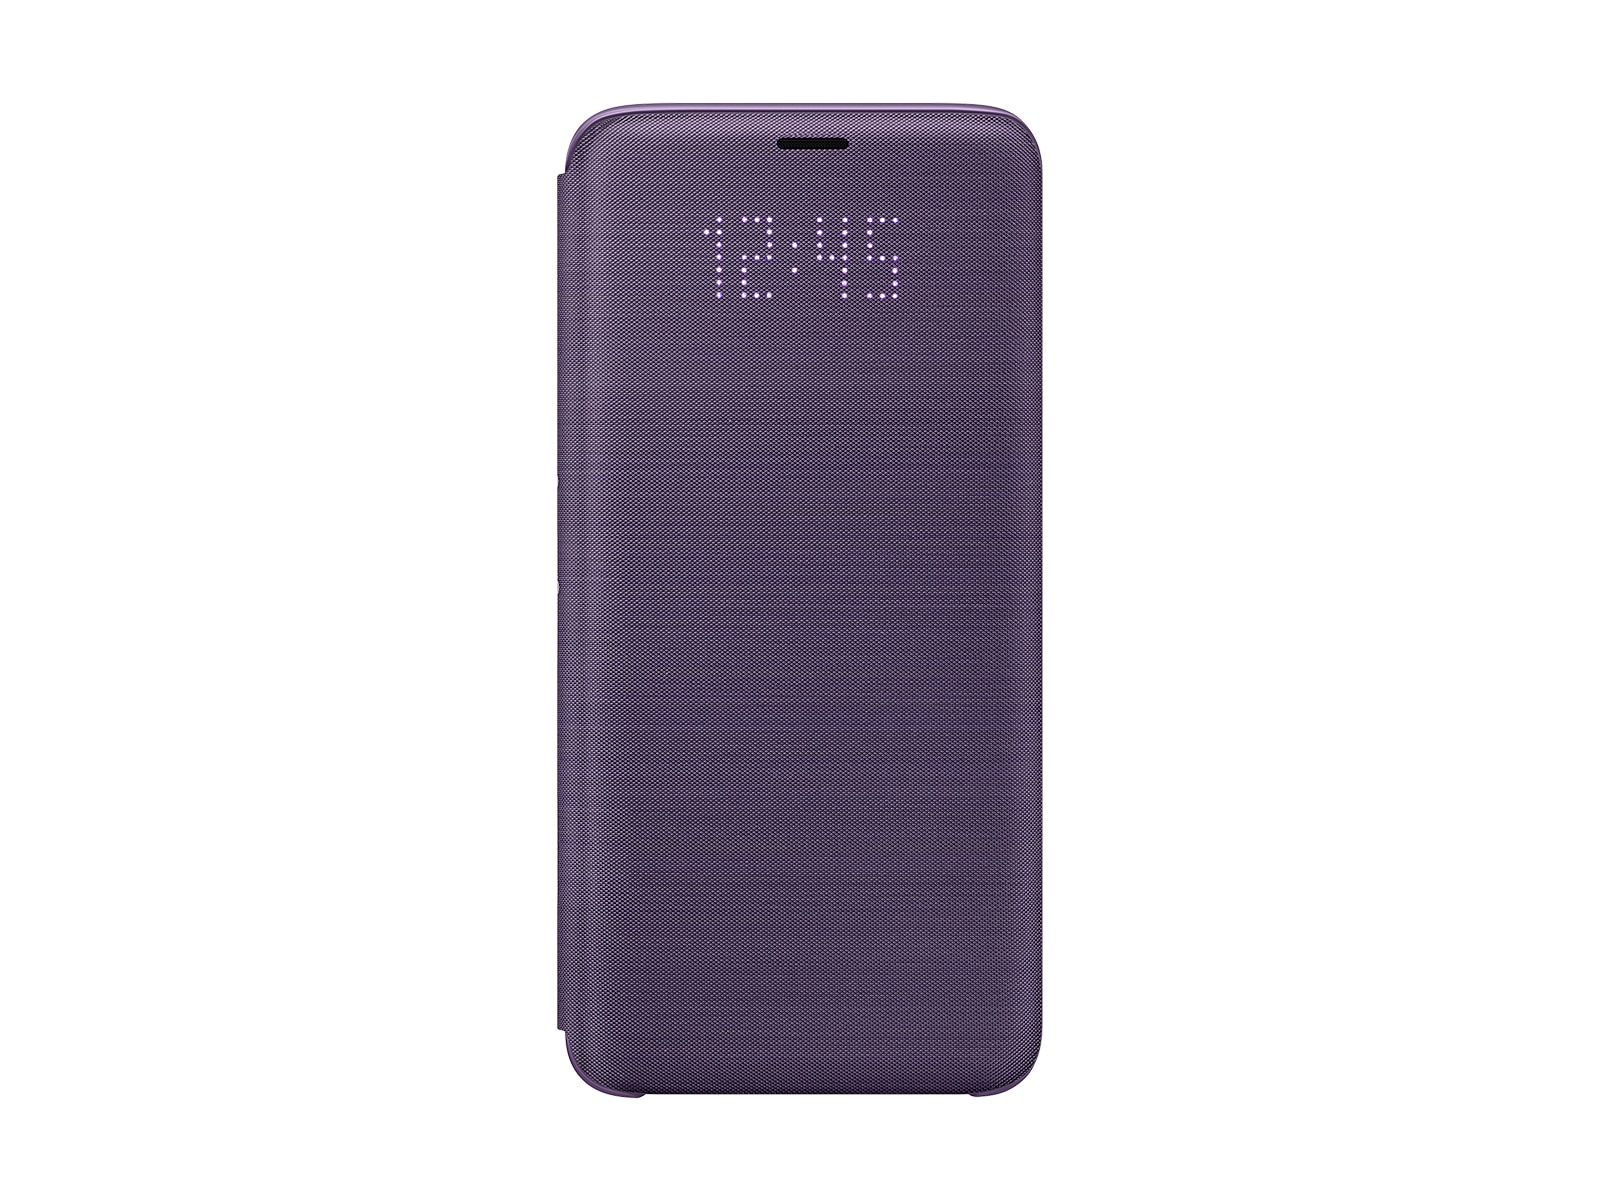 Thumbnail image of Galaxy S9 LED Wallet Cover, Violet